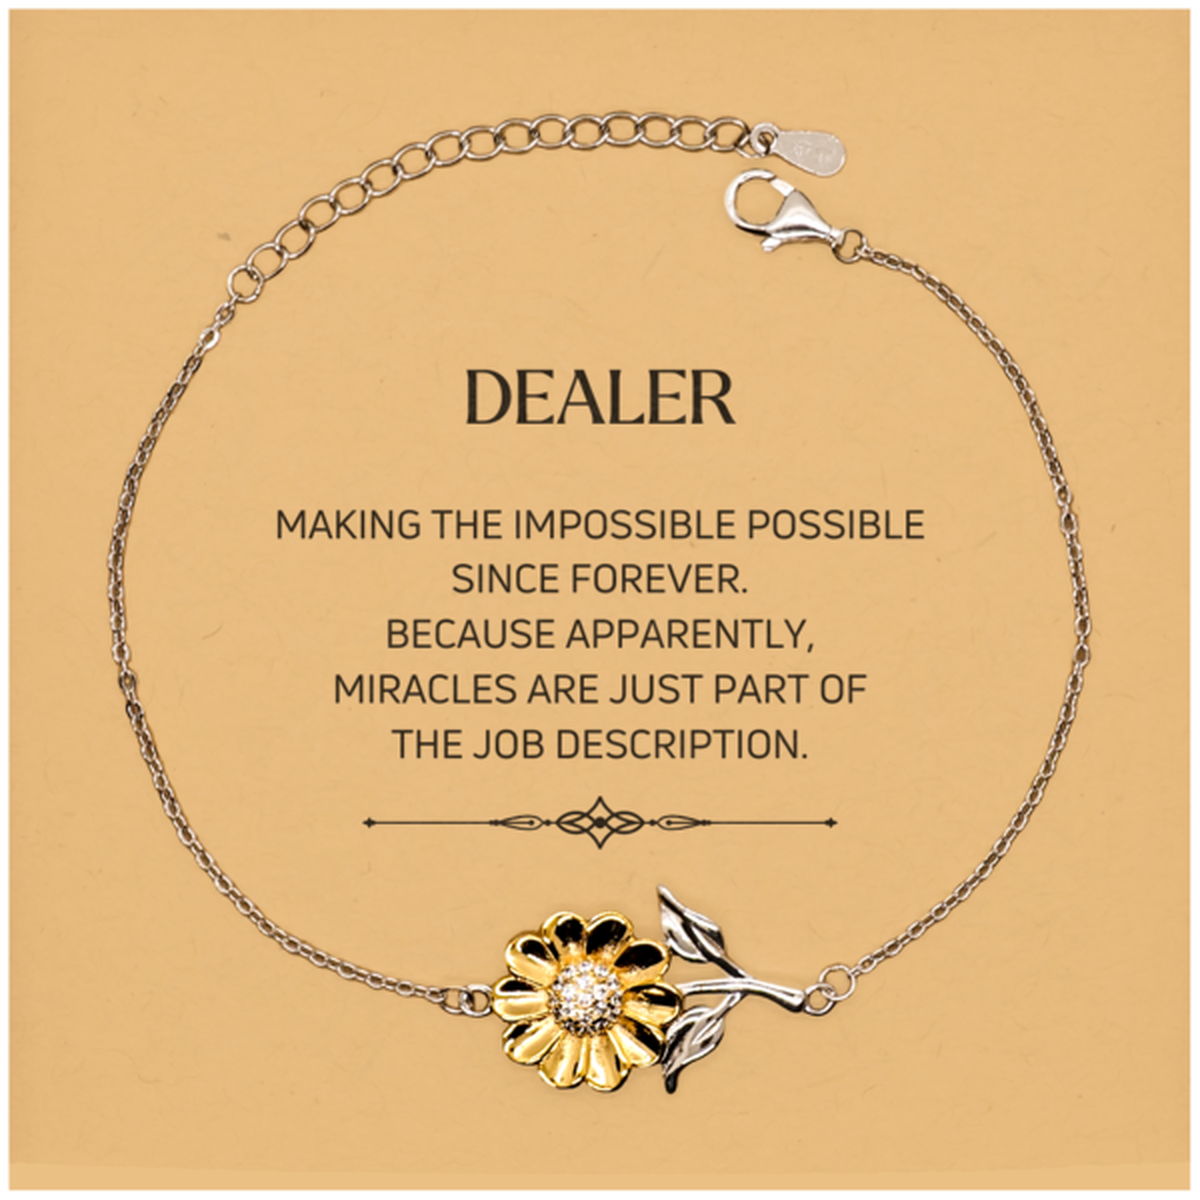 Funny Dealer Gifts, Miracles are just part of the job description, Inspirational Birthday Christmas Sunflower Bracelet For Dealer, Men, Women, Coworkers, Friends, Boss